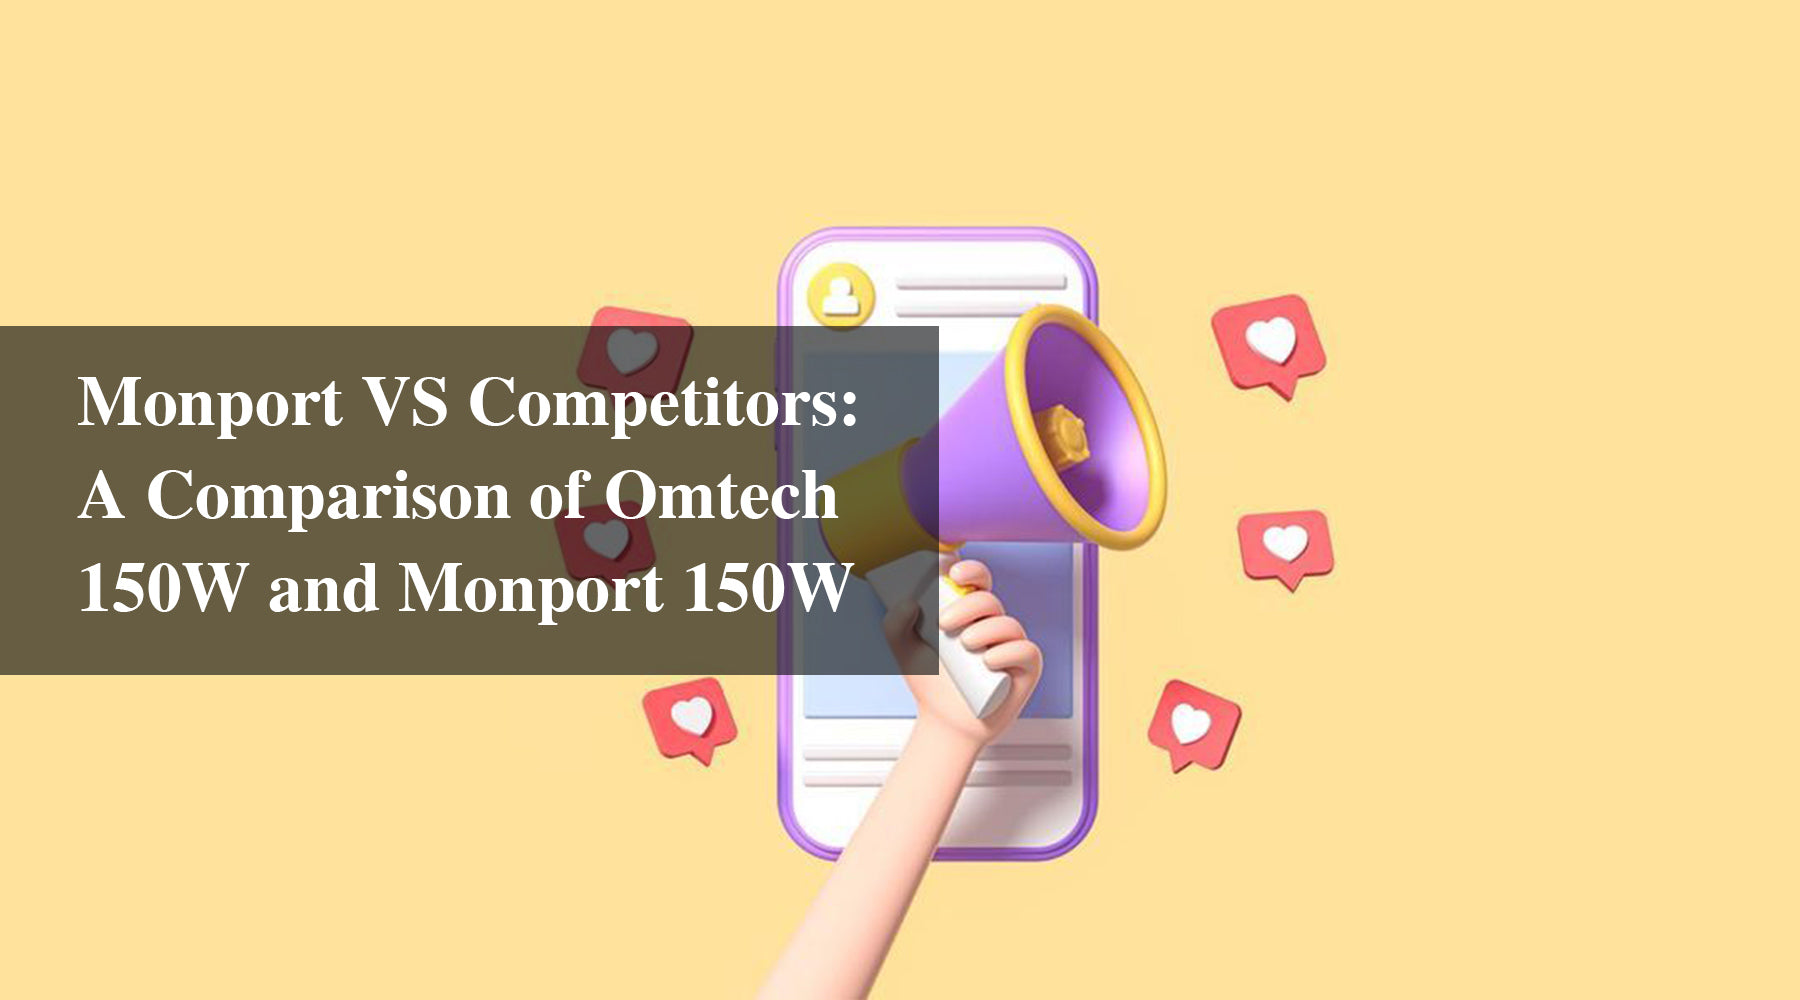 Monport VS Competitors: A Comparison of Omtech 150W and Monport 150W